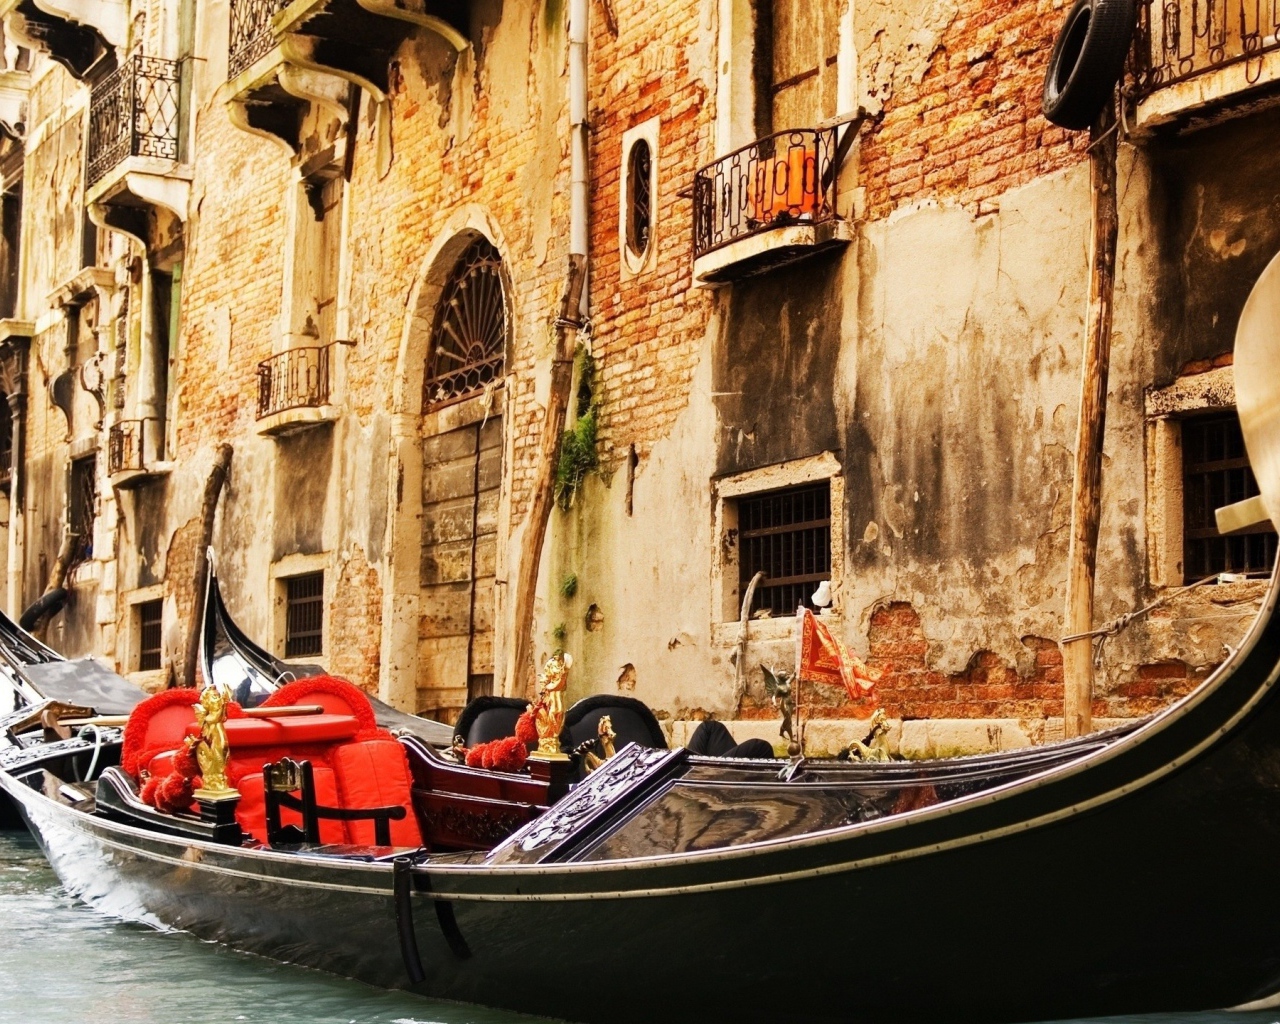 Boat around the house in Venice